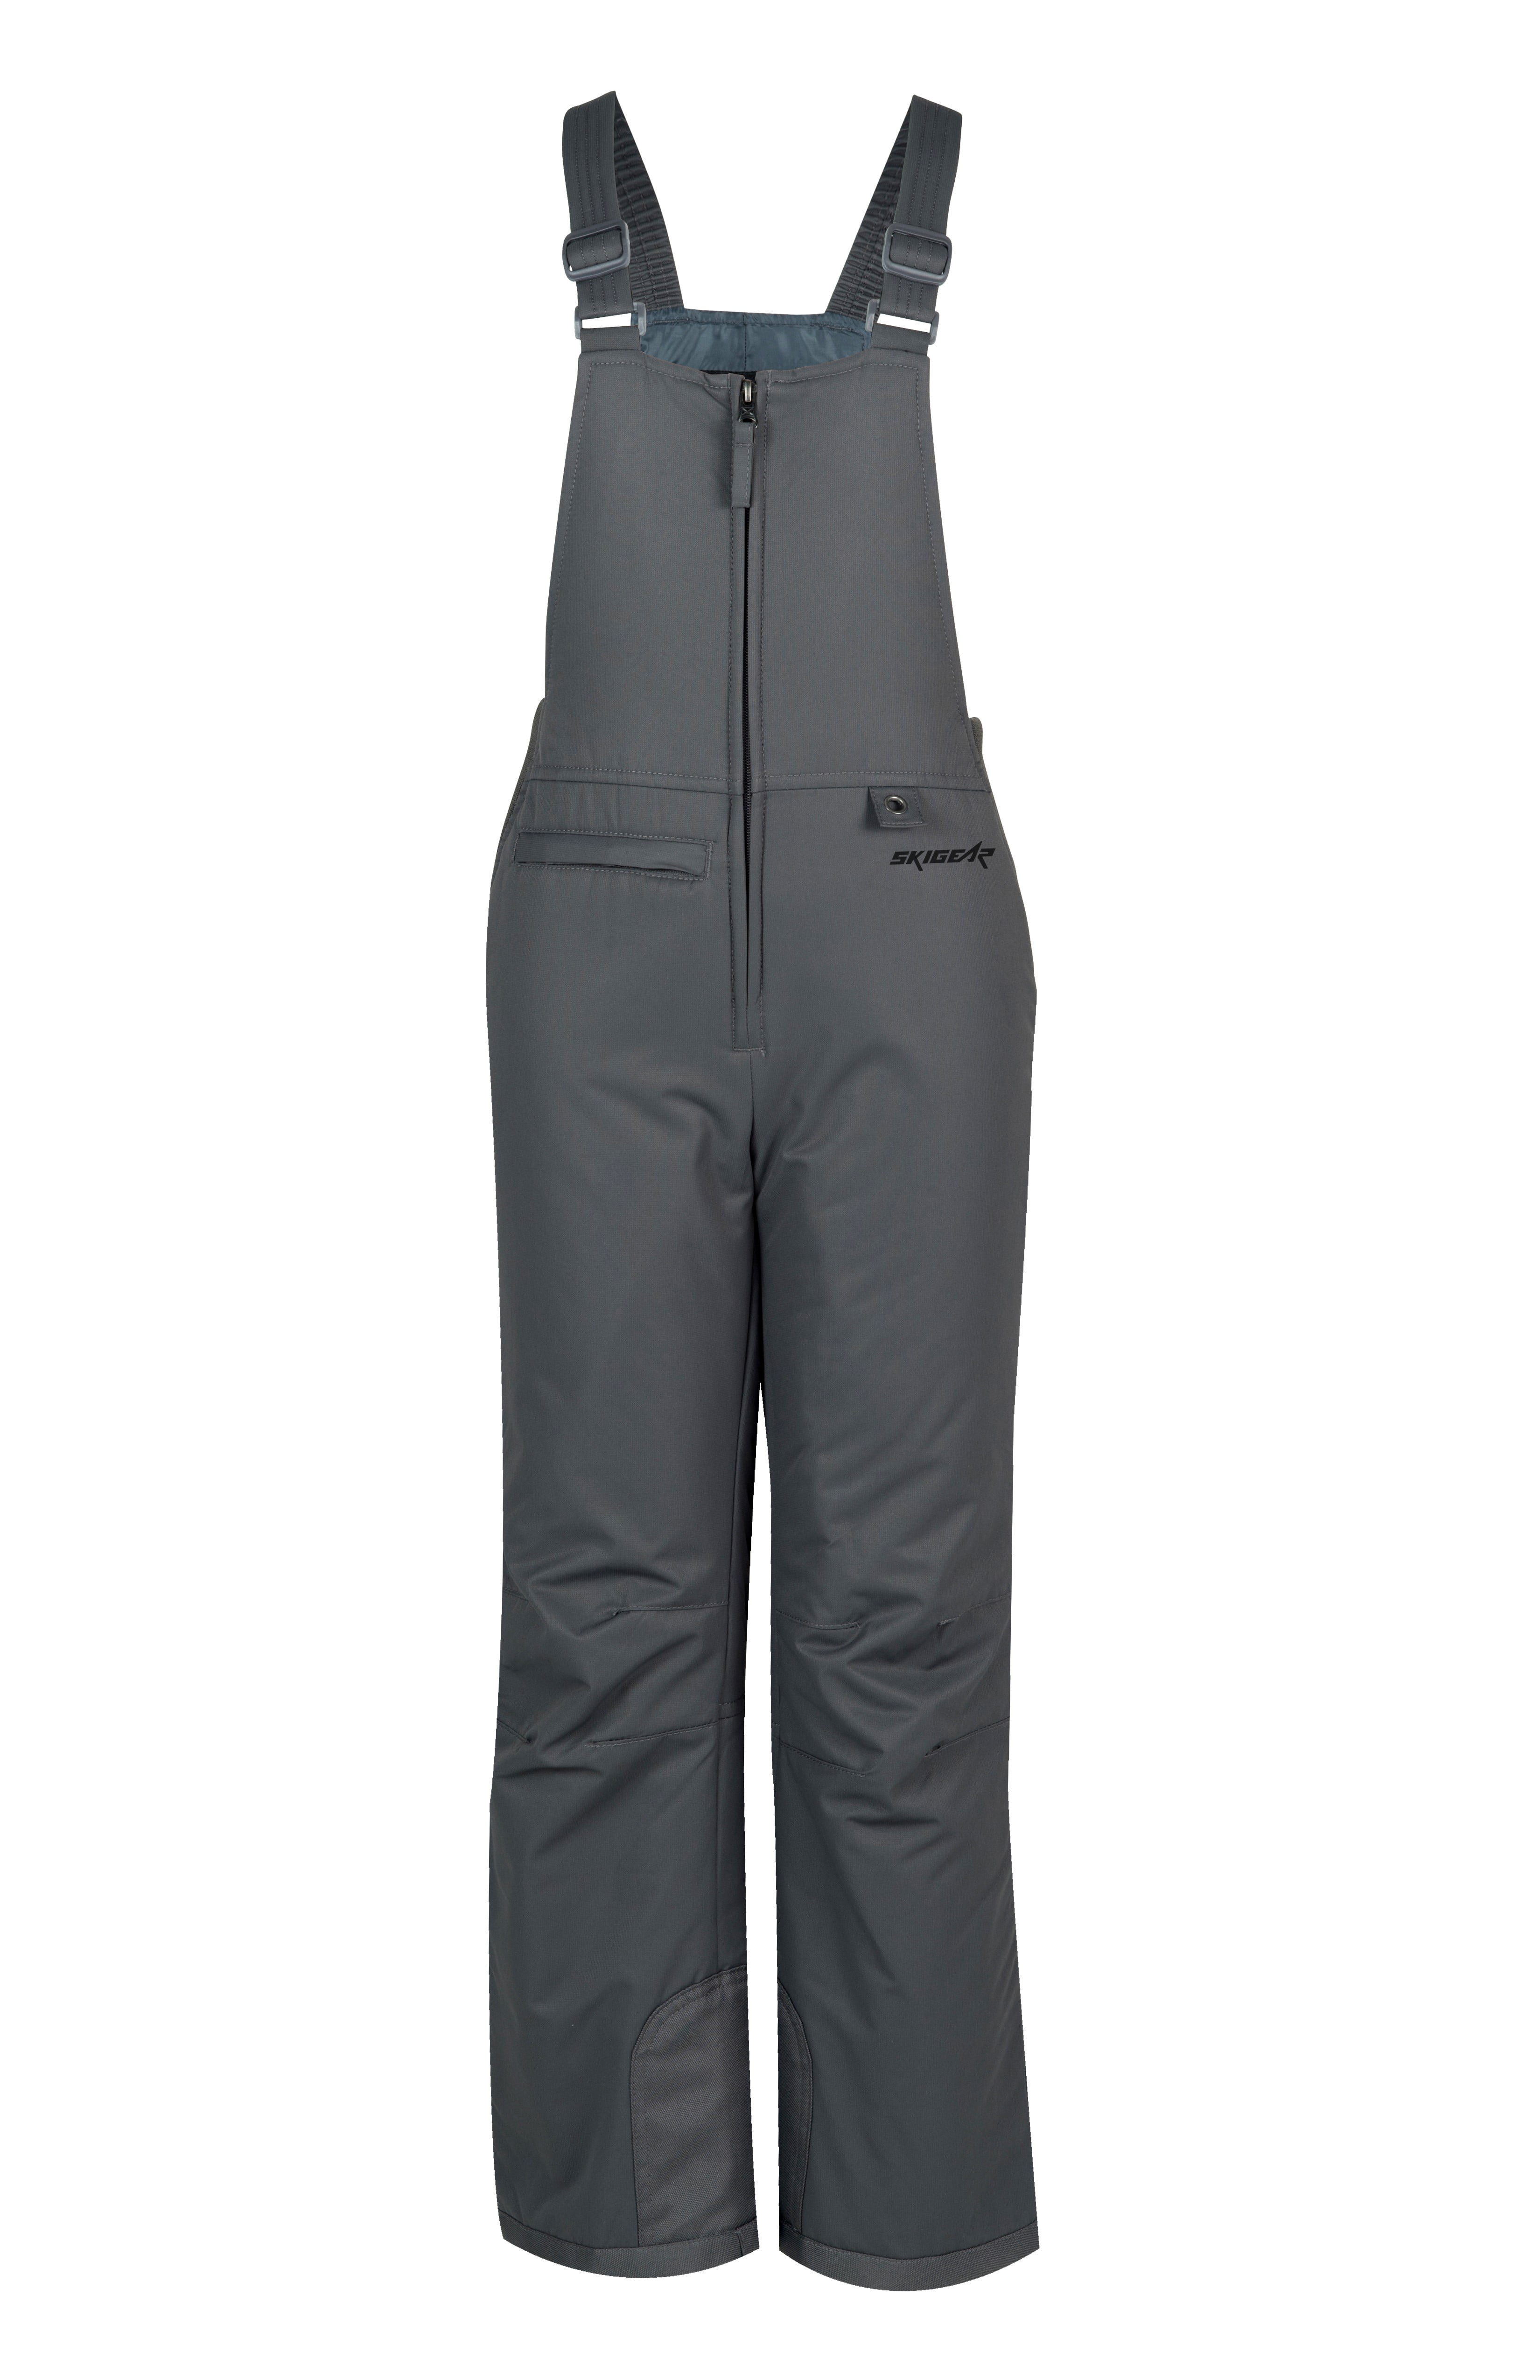 Ski Gear by Arctix Youth Insulated Snow Bib Overalls - Xsmall, Charcoal 